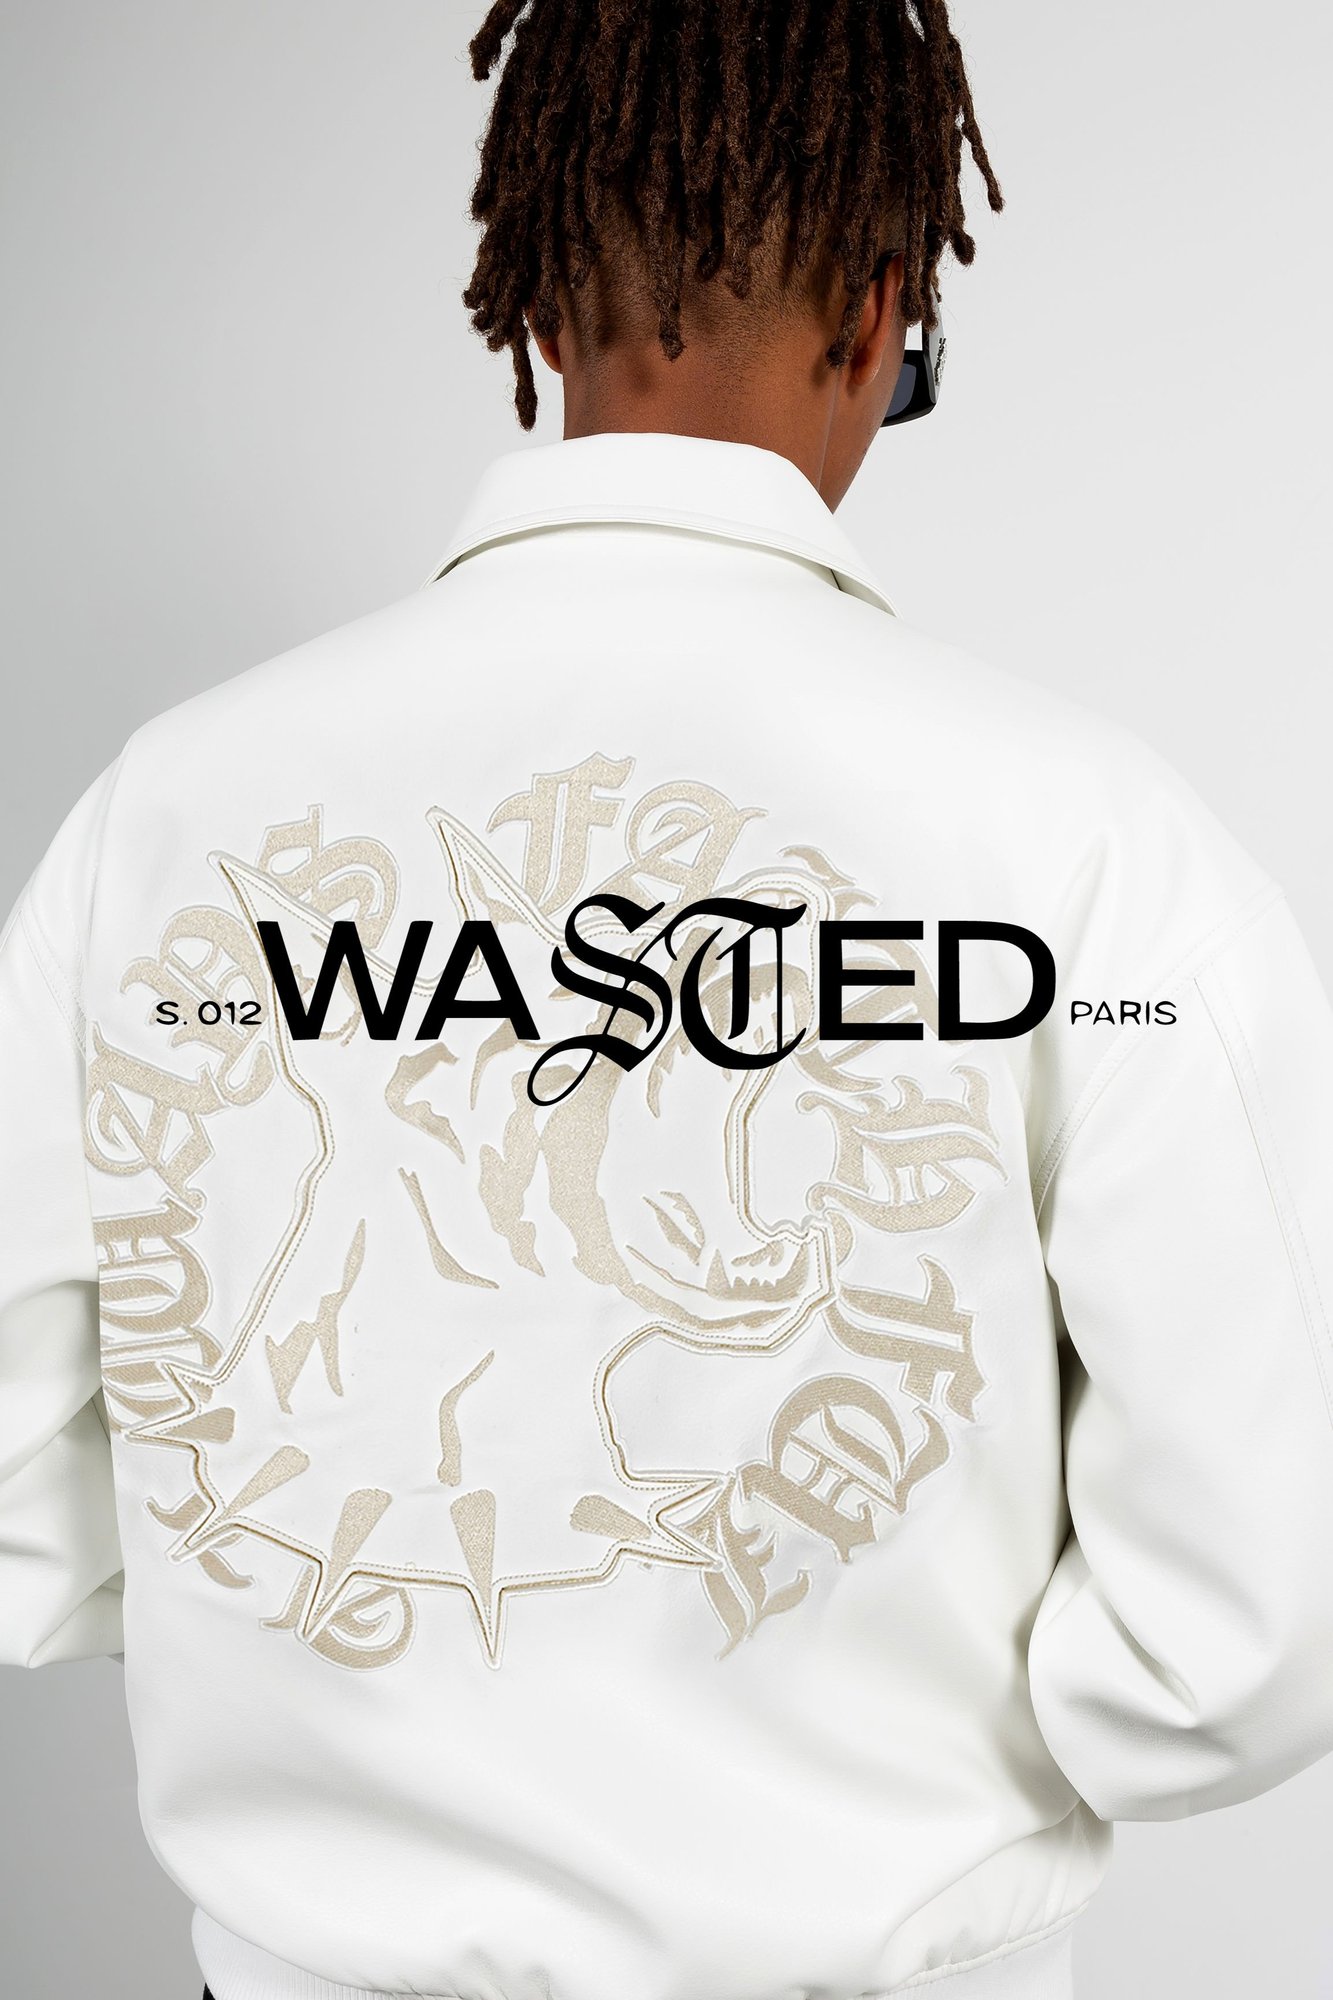 Wasted with logo